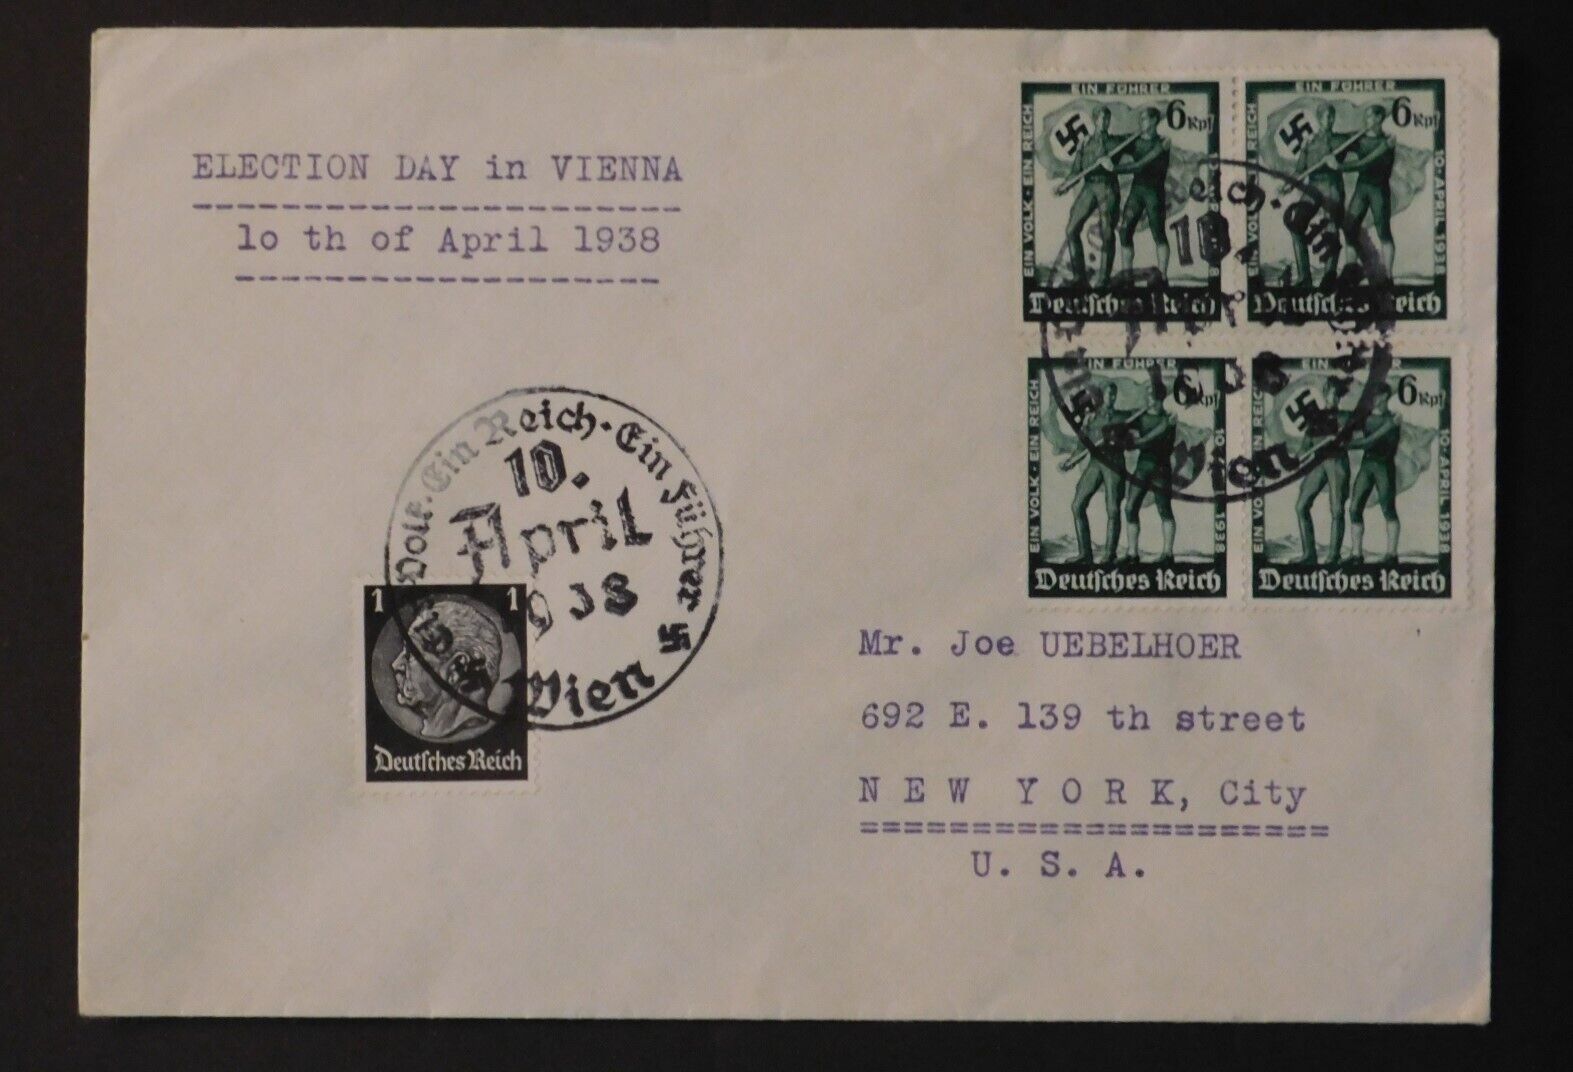 1938 Vienna Germany Election Day Cover to New York City USA with Block 4